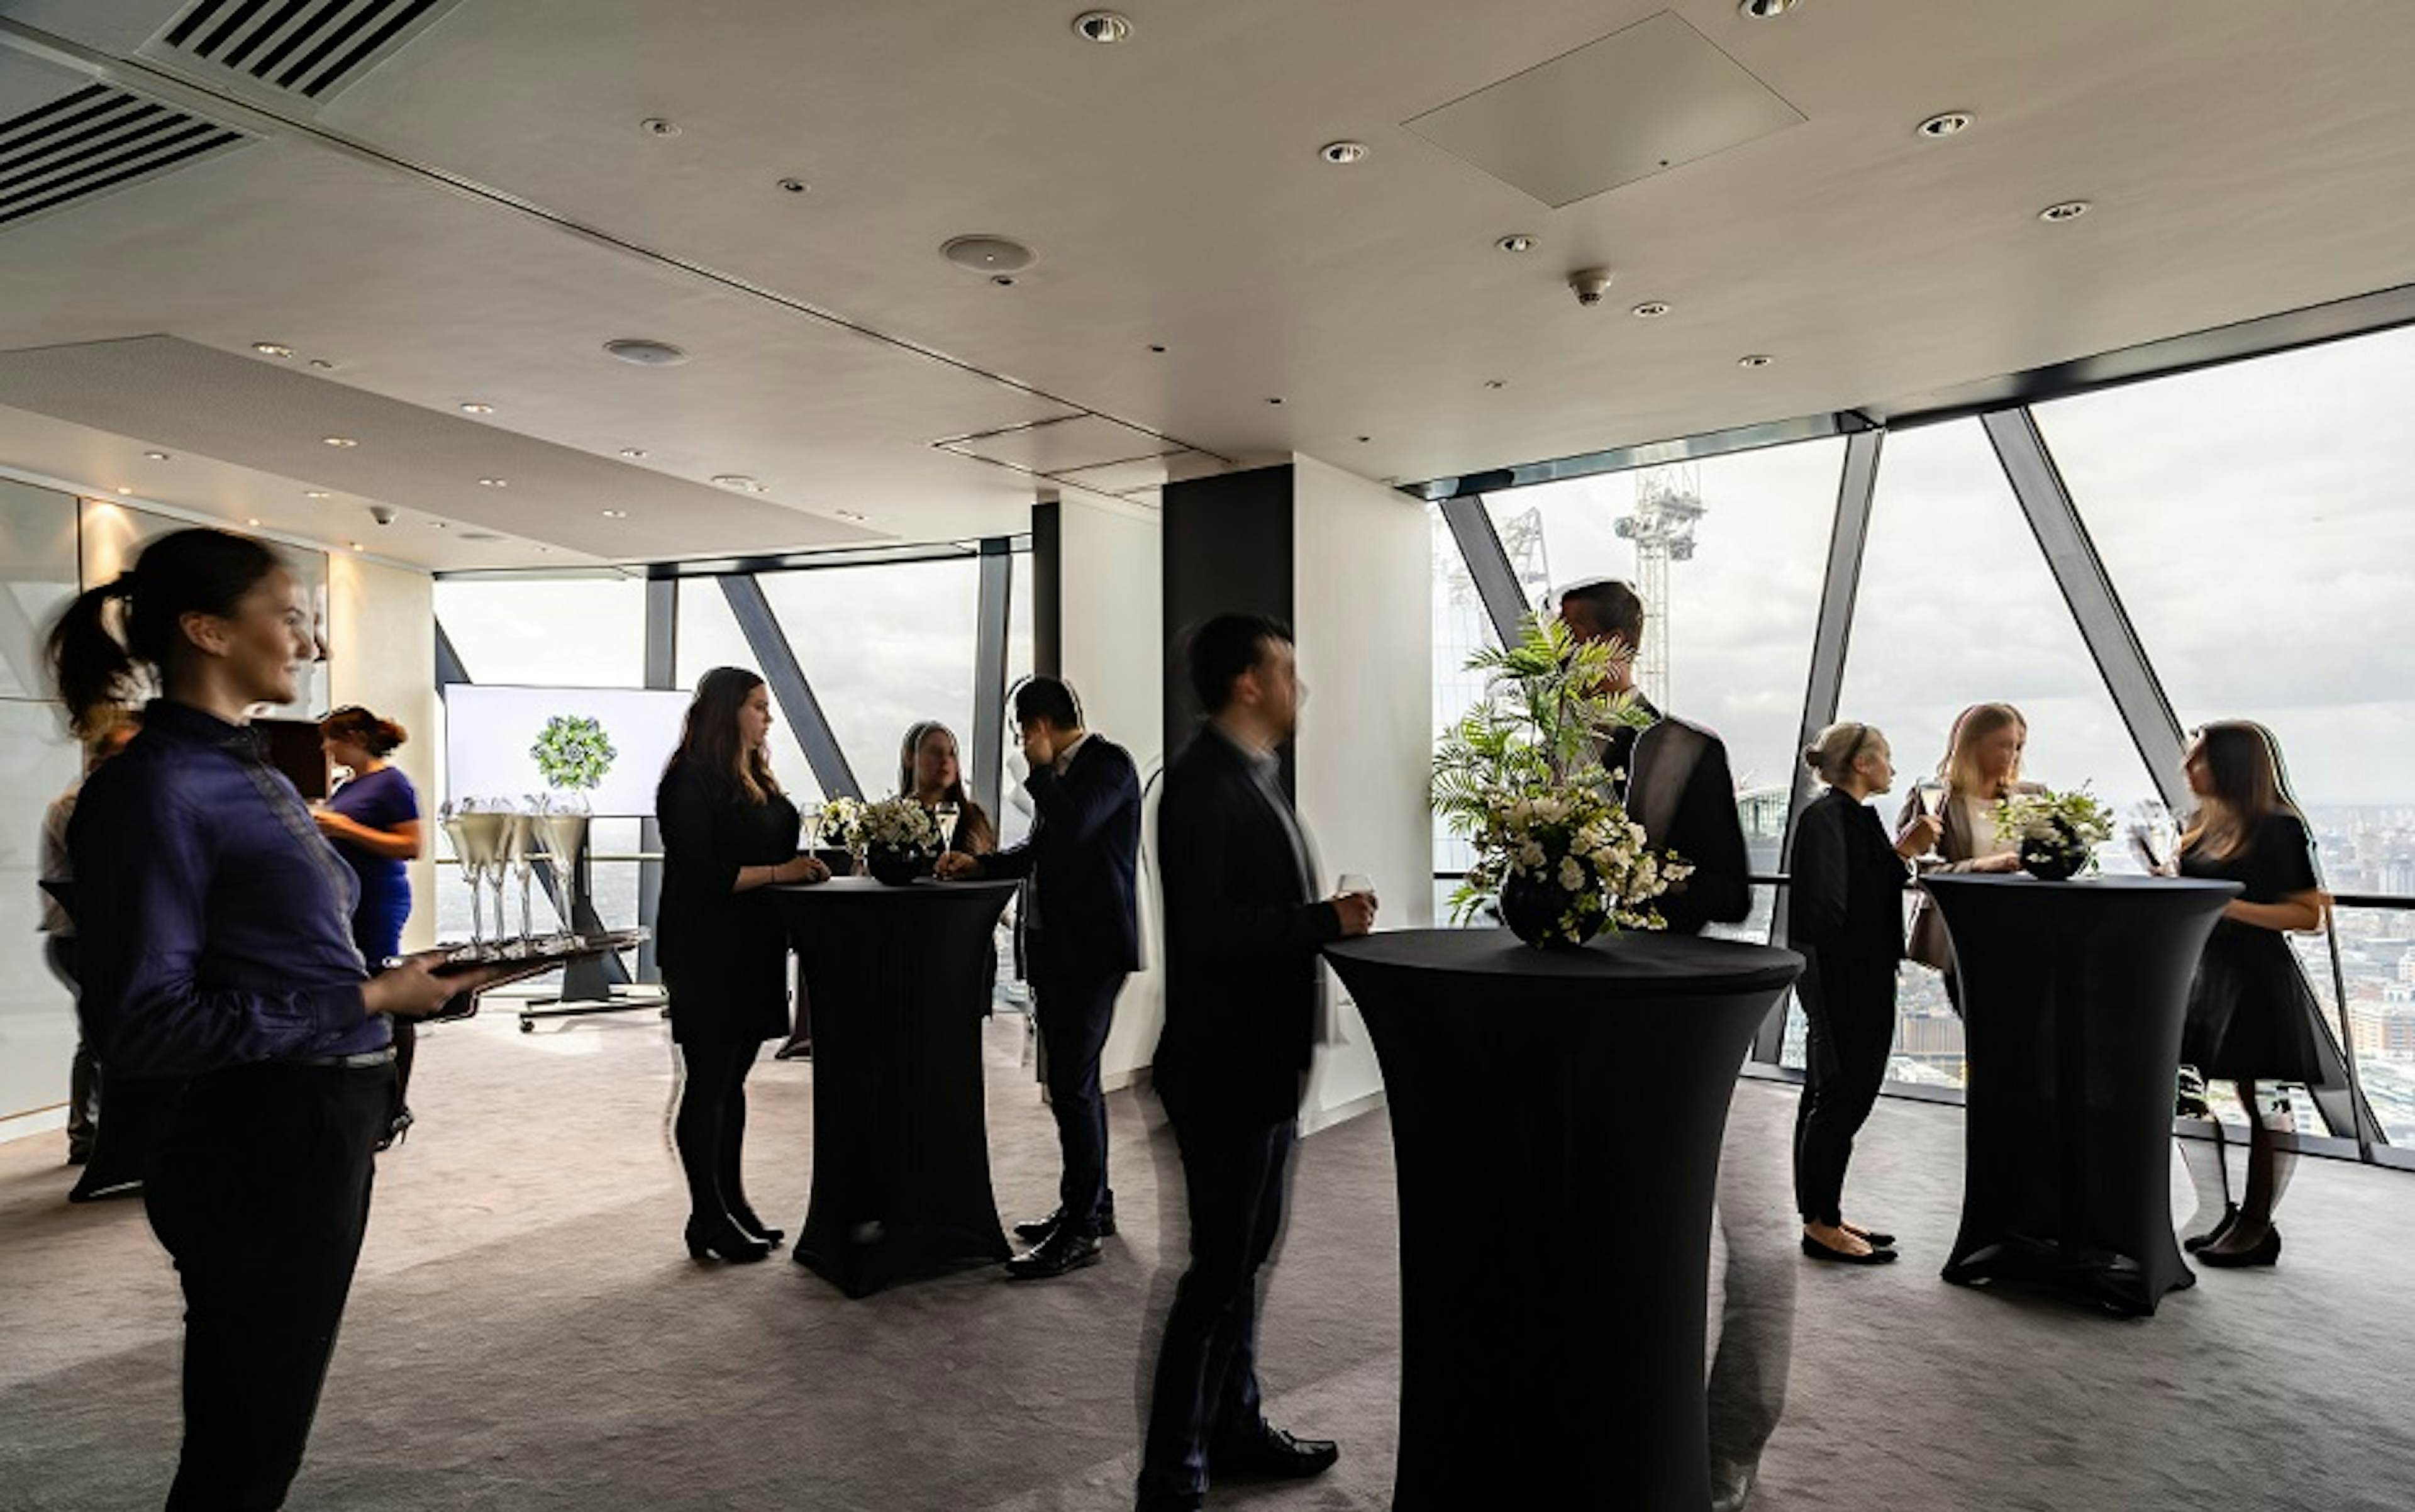 Searcys at the Gherkin - Double private dining rooms image 1